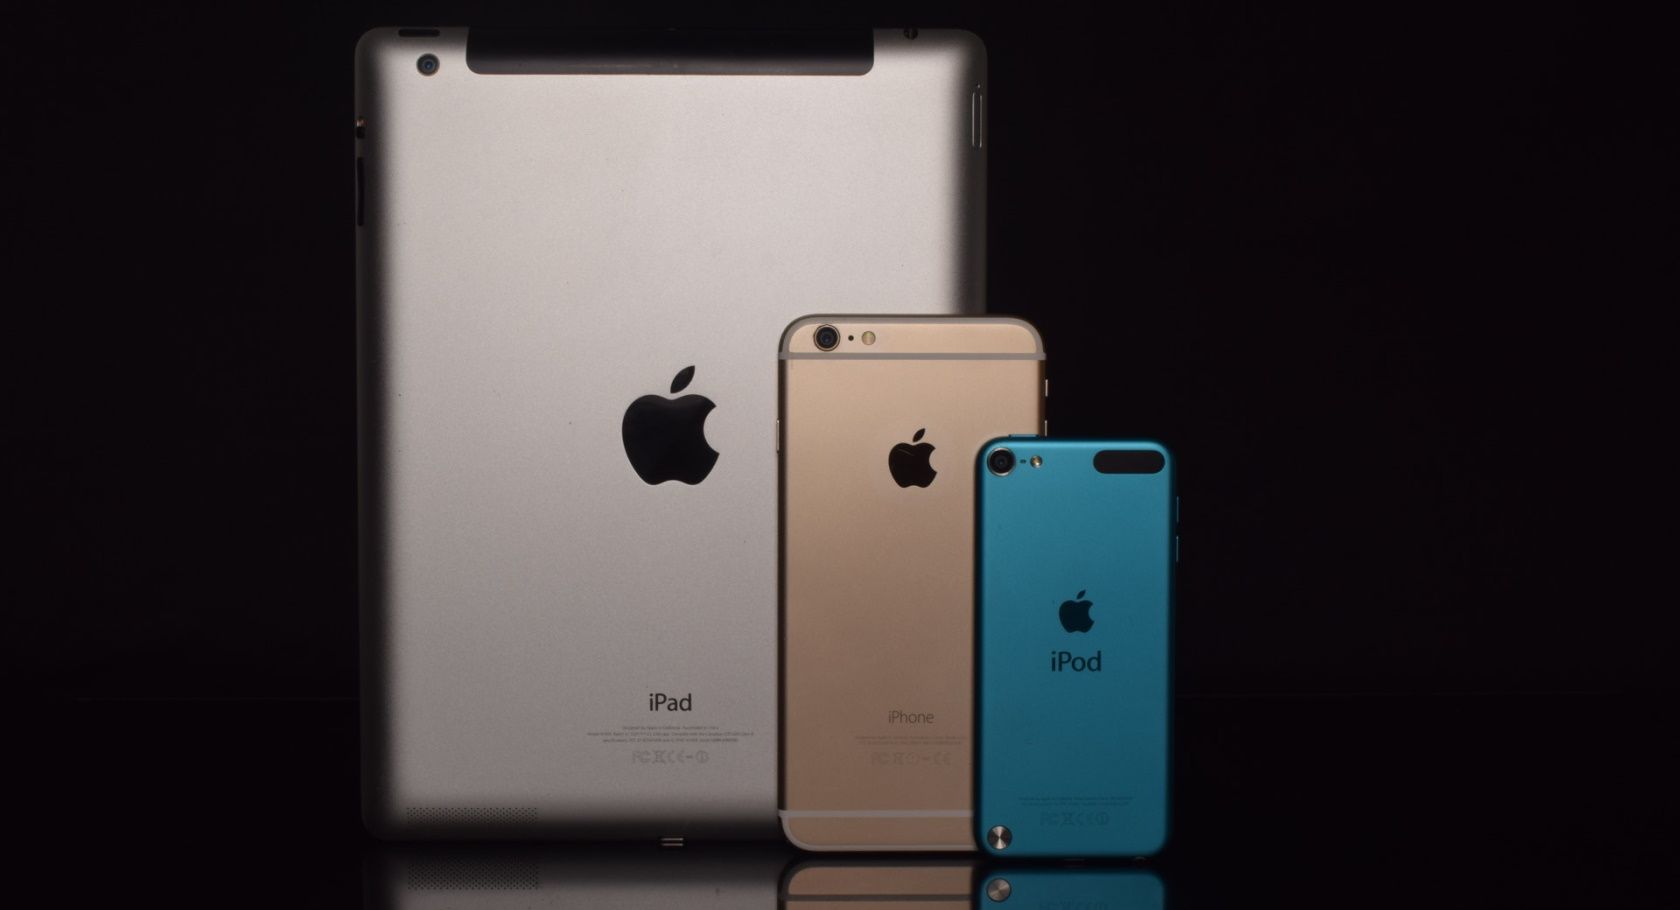 iPod Touch, iPhone, and iPad next to each other